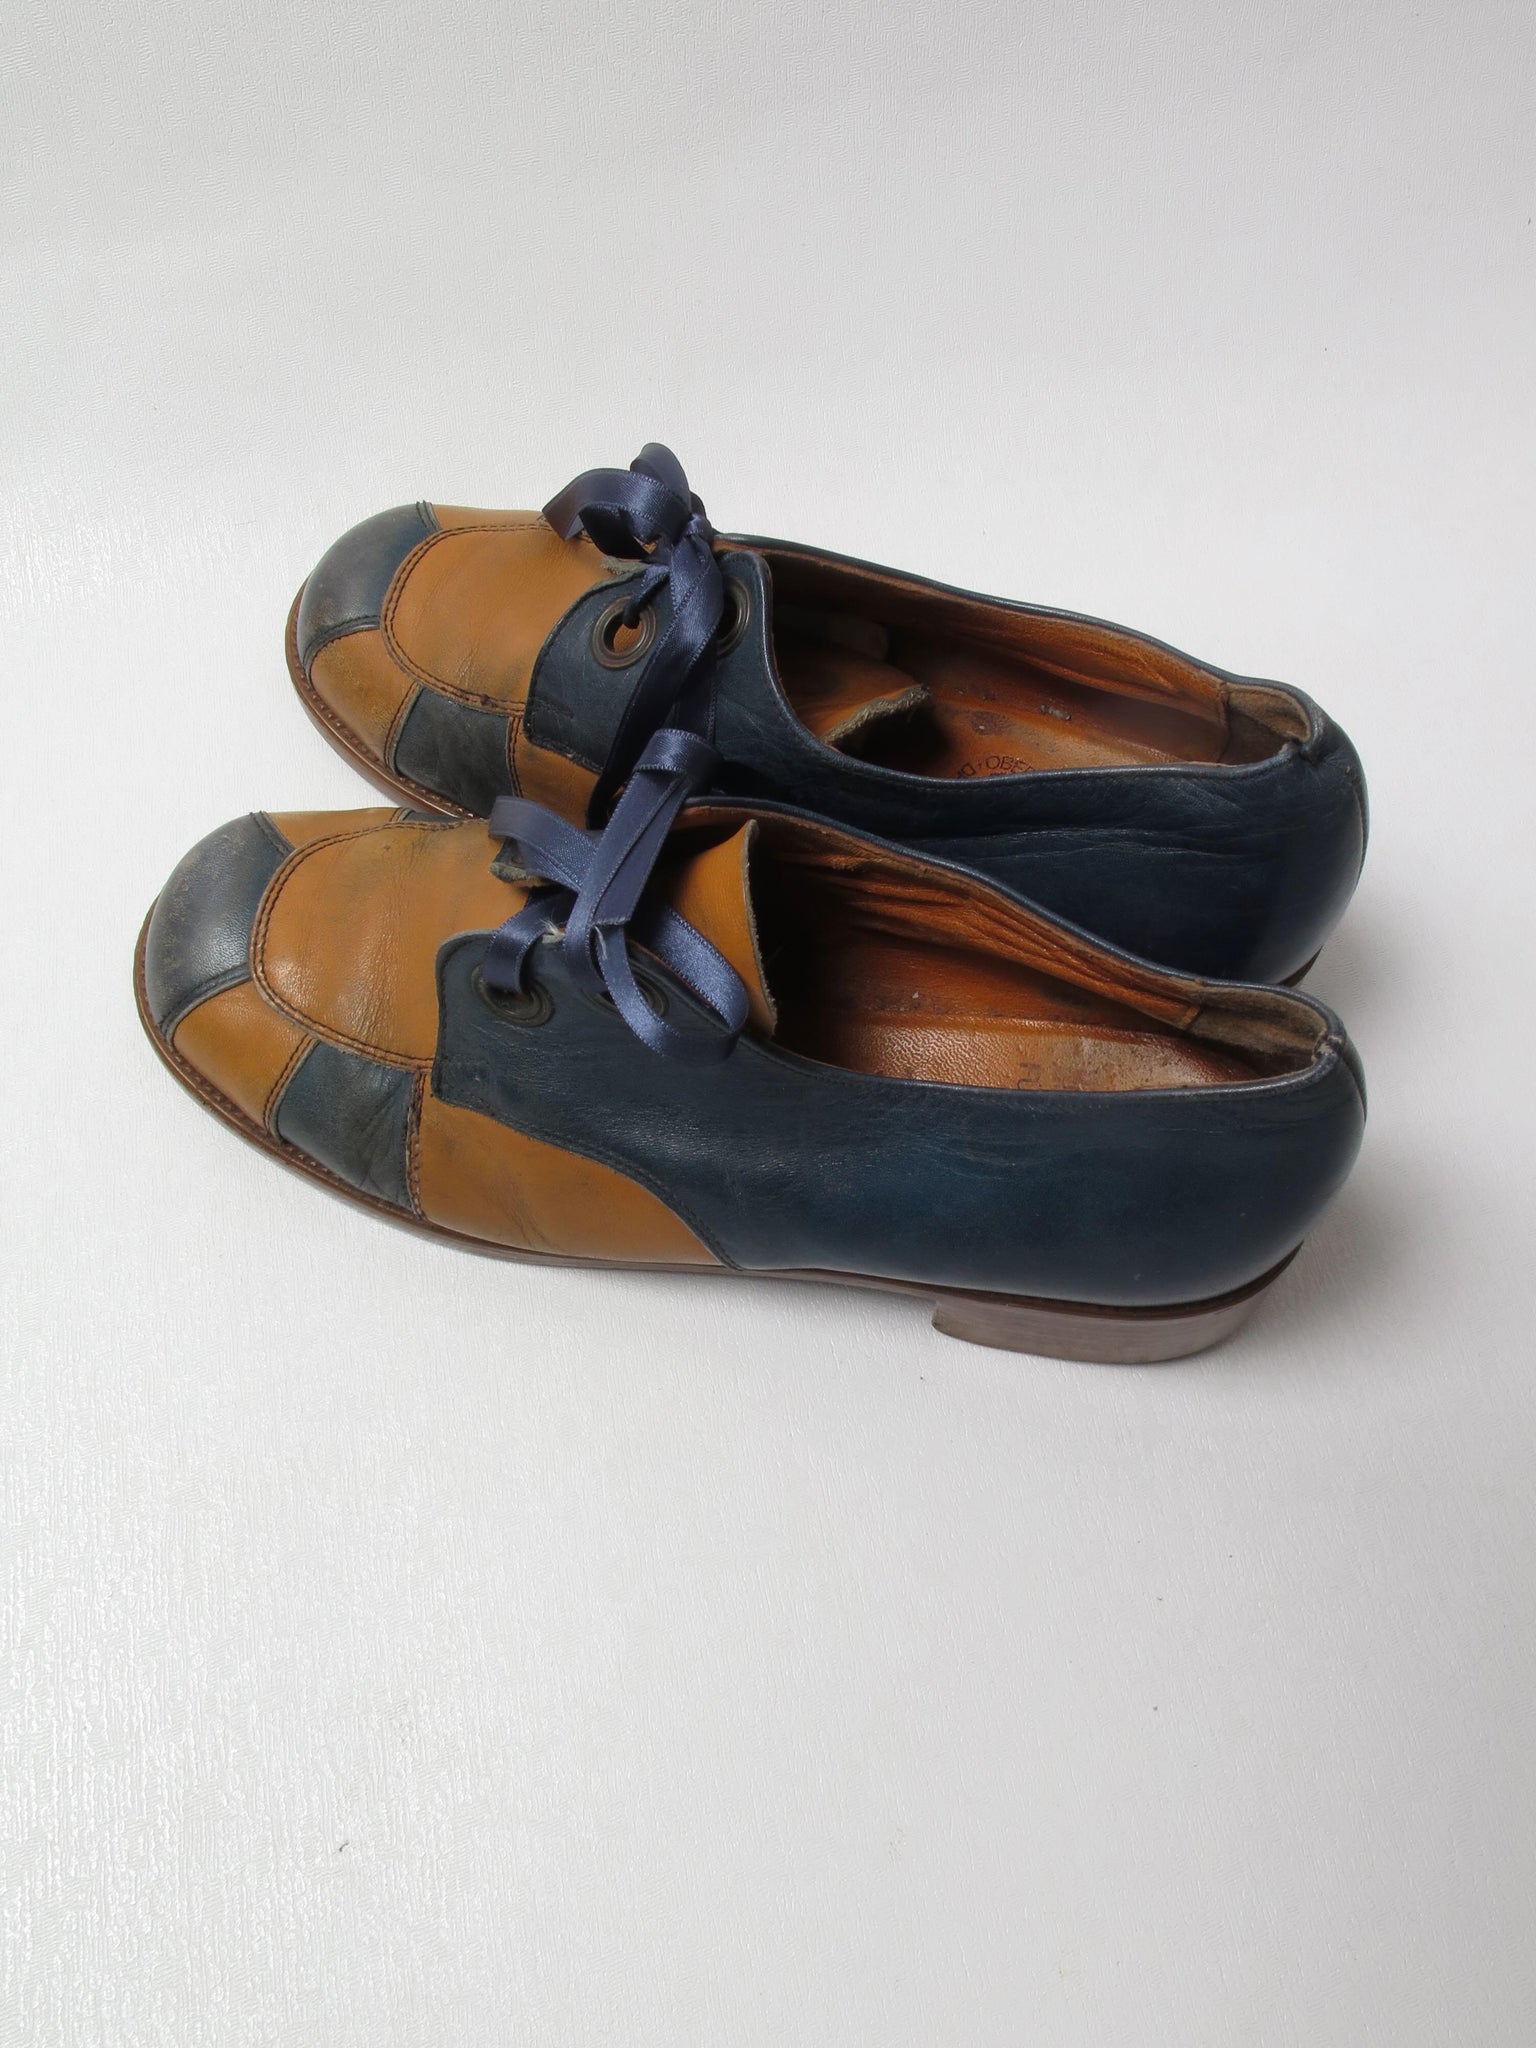 Blue & Tan Lace Up Vintage 1970s Shoes 37/4 - The Harlequin